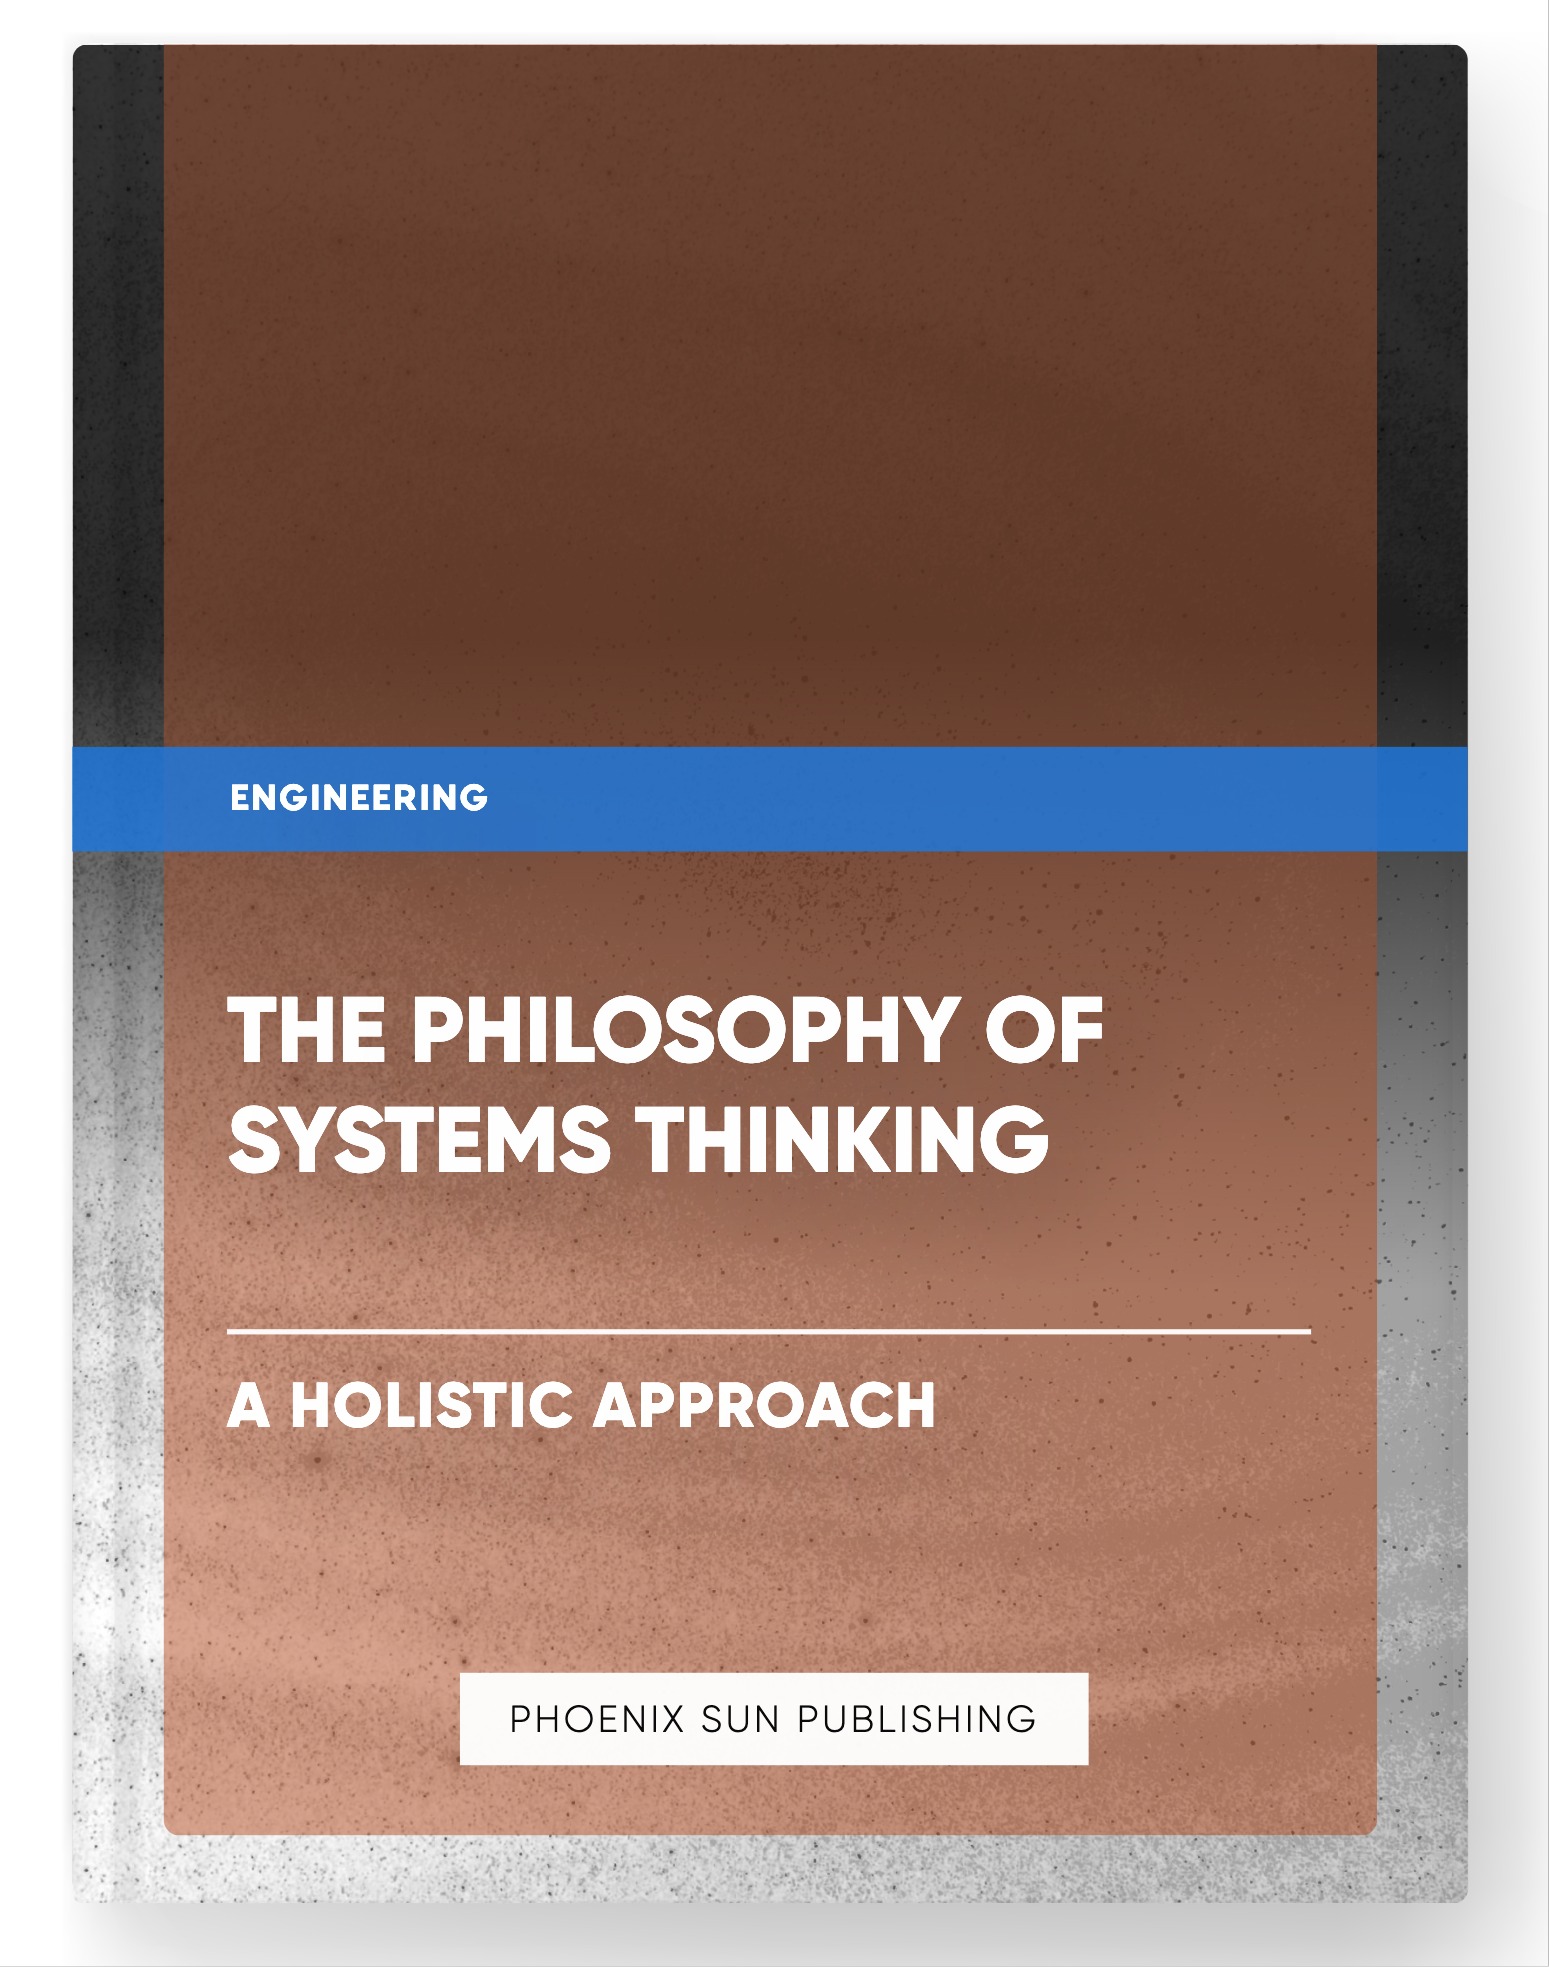 The Philosophy of Systems Thinking – A Holistic Approach